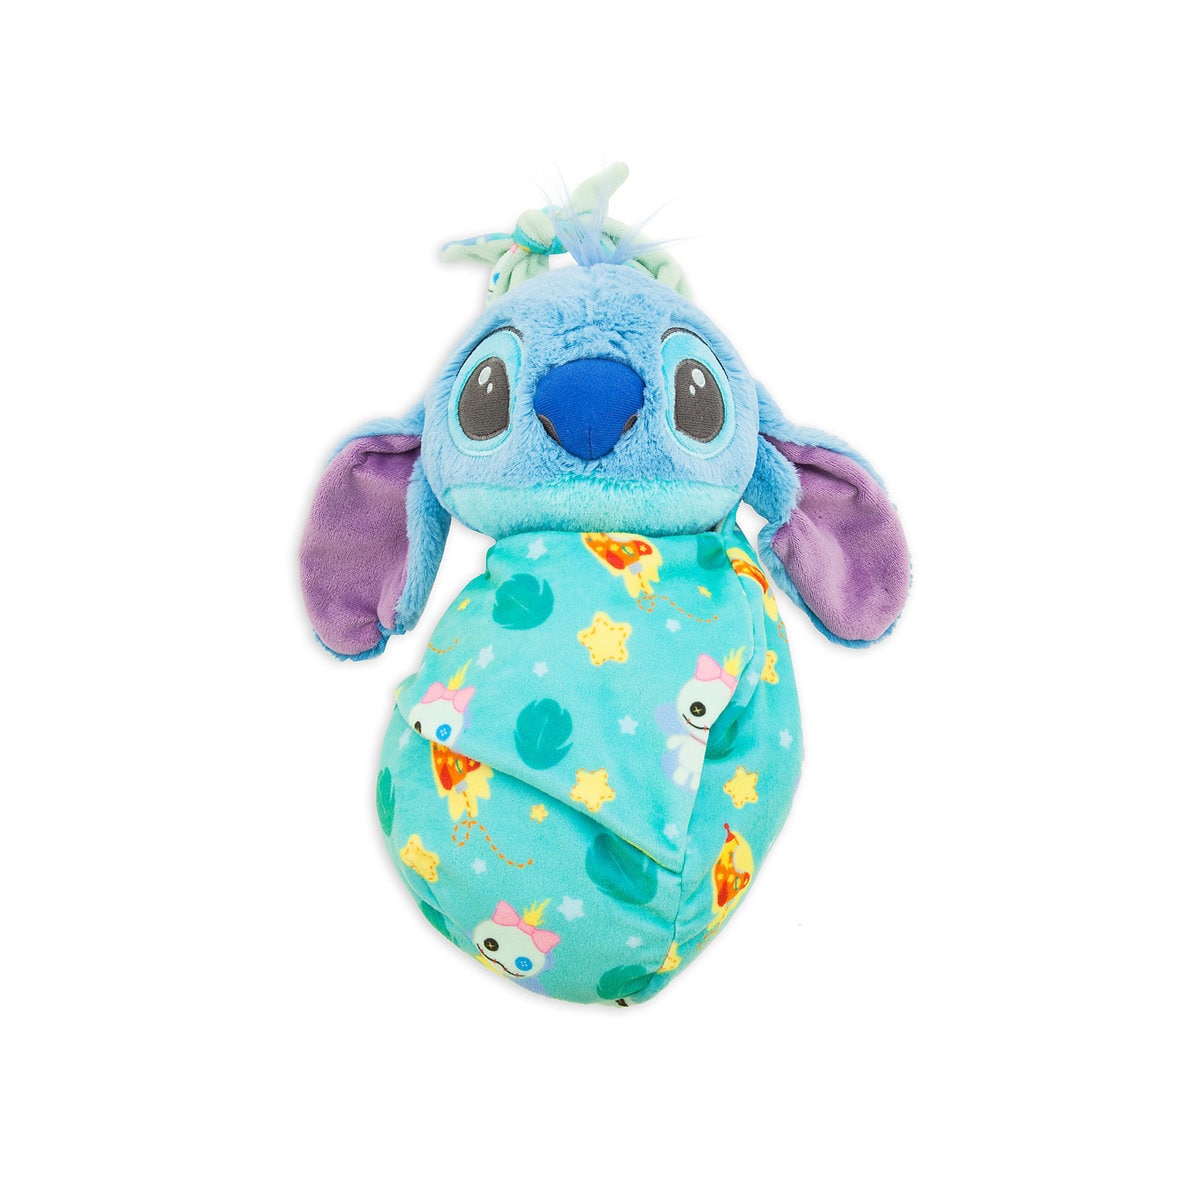 Top 25 Disney Gift Ideas for Babies featured by top US Disney blogger, Marcie and the Mouse: Babies will love this baby Stitch plush toy